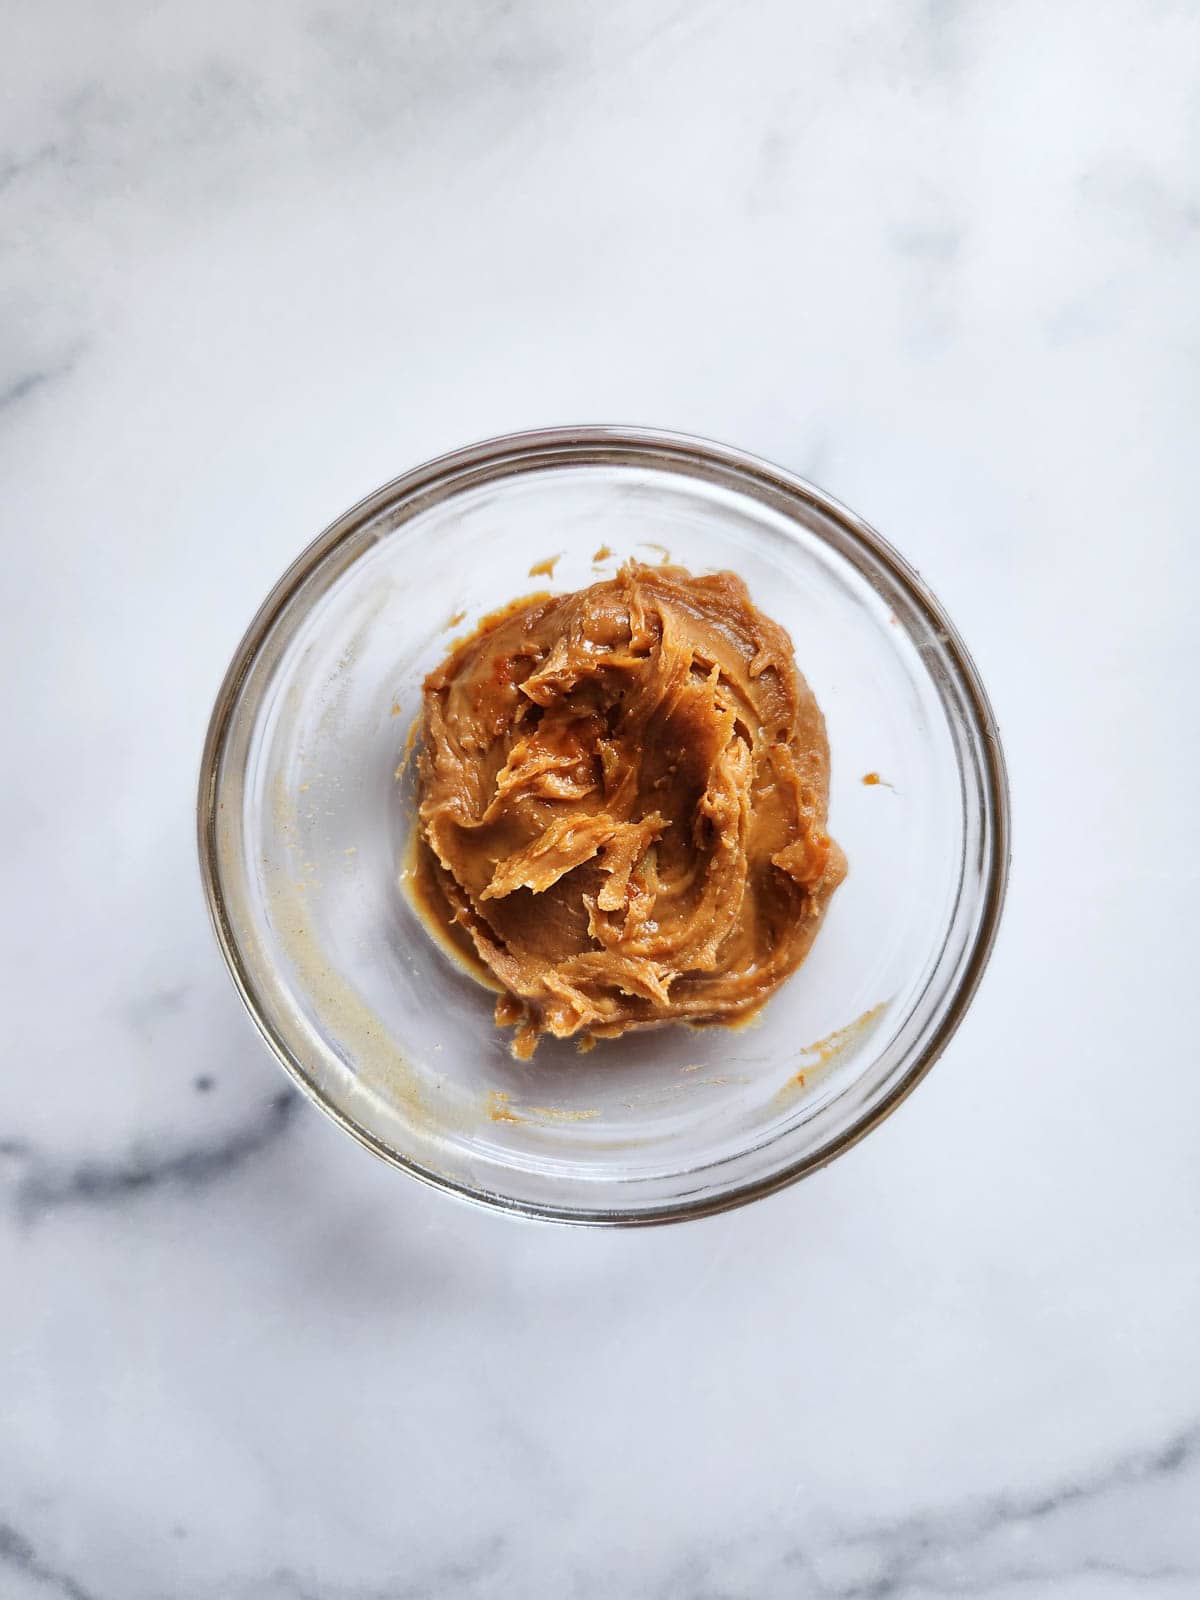 Mixed Thai peanut butter in a bowl.